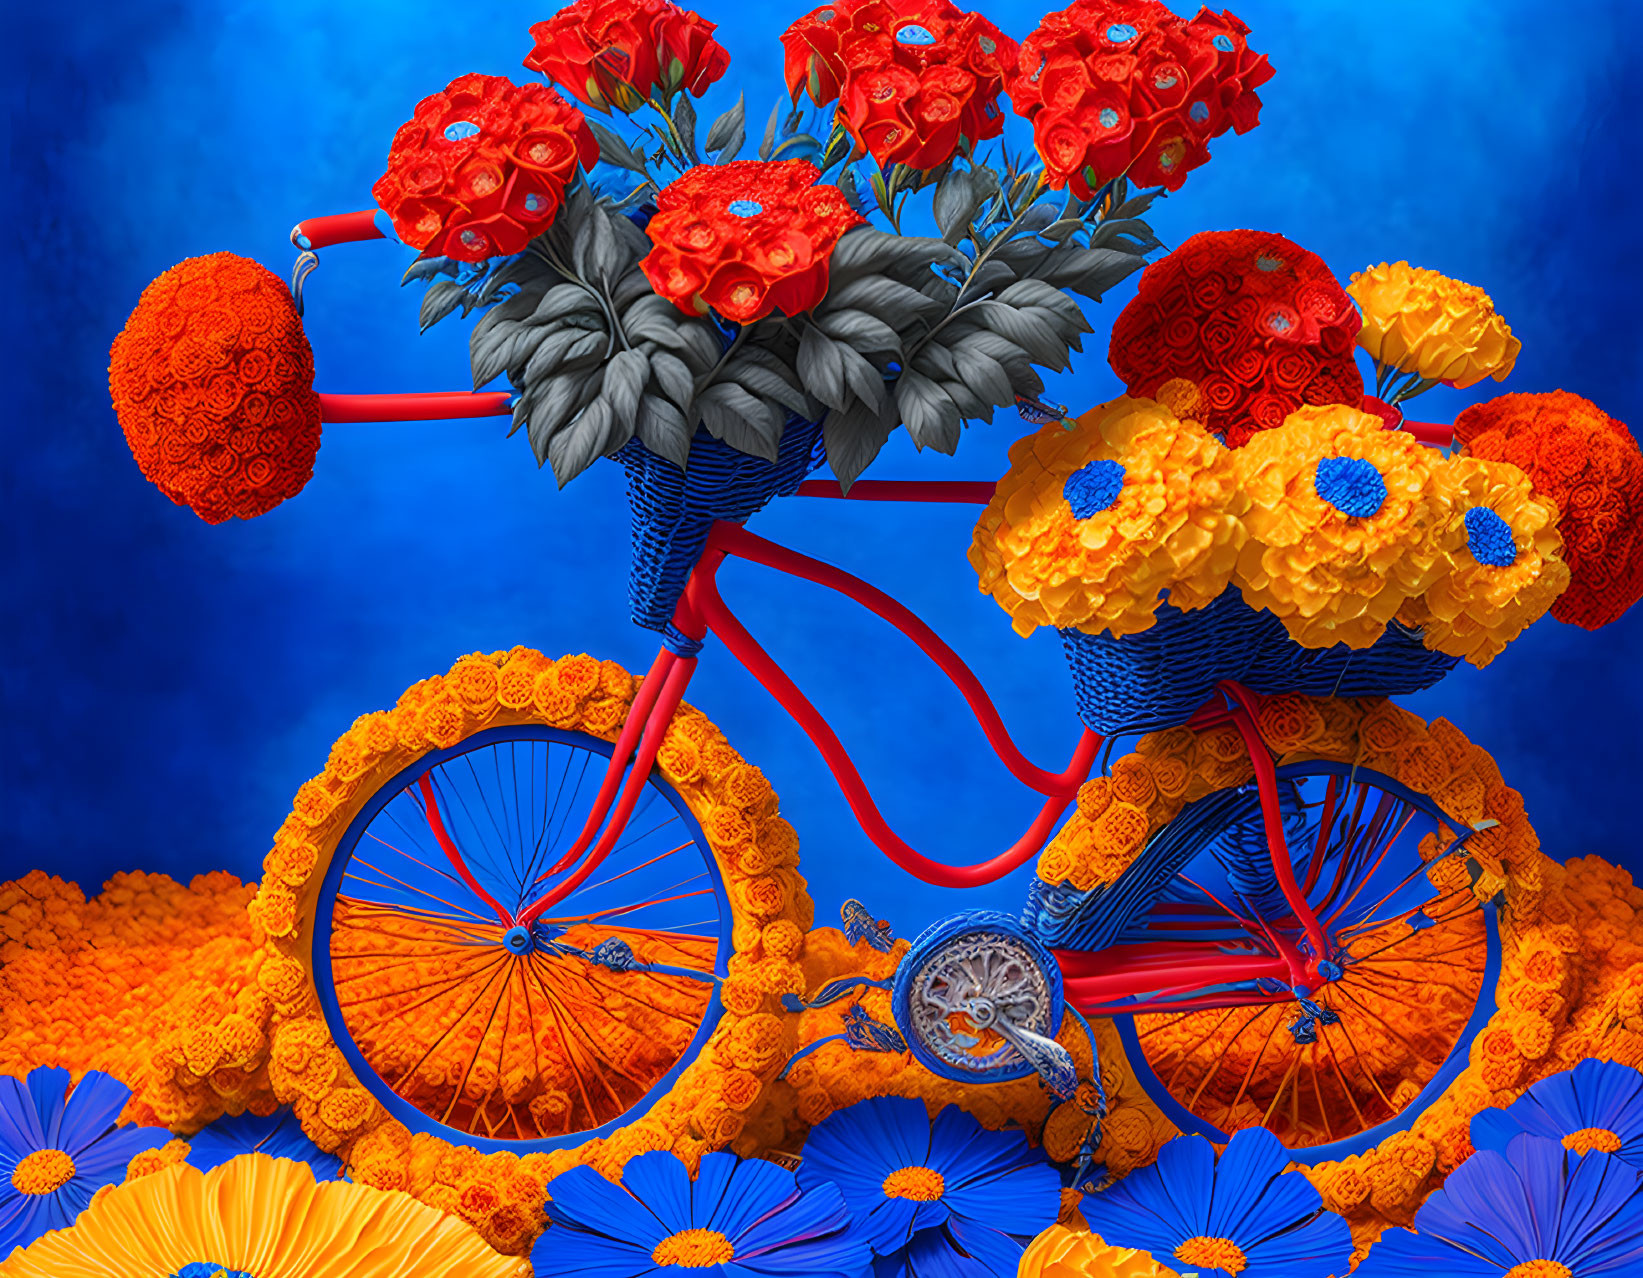 Colorful Artwork: Red Bicycle with Flowers on Blue Background